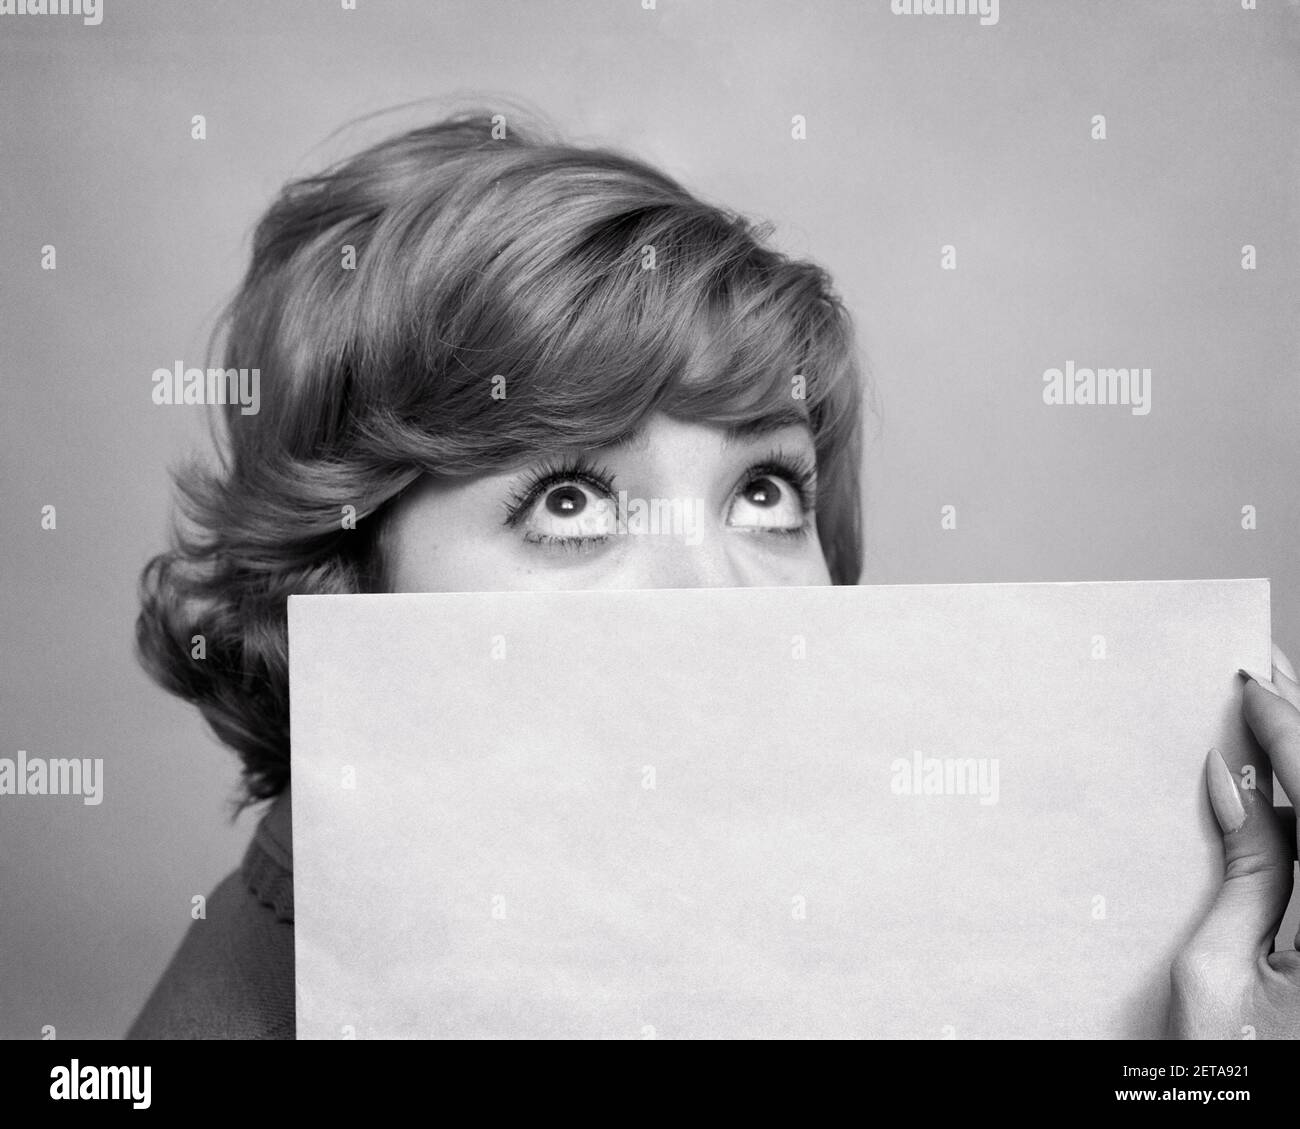 1960s WOMAN GREAT BIG EYES LOOKING UP OVER THE TOP OF A BLANK SIGN CARD HIDING THE LOWER PART OF HER FACE - g3702 DUN001 HARS COPY SPACE LADIES LOWER PERSONS SYMBOLS B&W BUG-EYED HUMOROUS HEAD AND SHOULDERS ADVERTISEMENT AD COMICAL PART OPPORTUNITY OCCUPATIONS CONCEPT CONNECTION CONCEPTUAL COMEDY SYMBOLIC WIDE-EYED CONCEPTS IDEAS LOOKING UP UNMARKED YOUNG ADULT WOMAN BLACK AND WHITE CAUCASIAN ETHNICITY MESSAGE OLD FASHIONED REPRESENTATION UNUSED Stock Photo